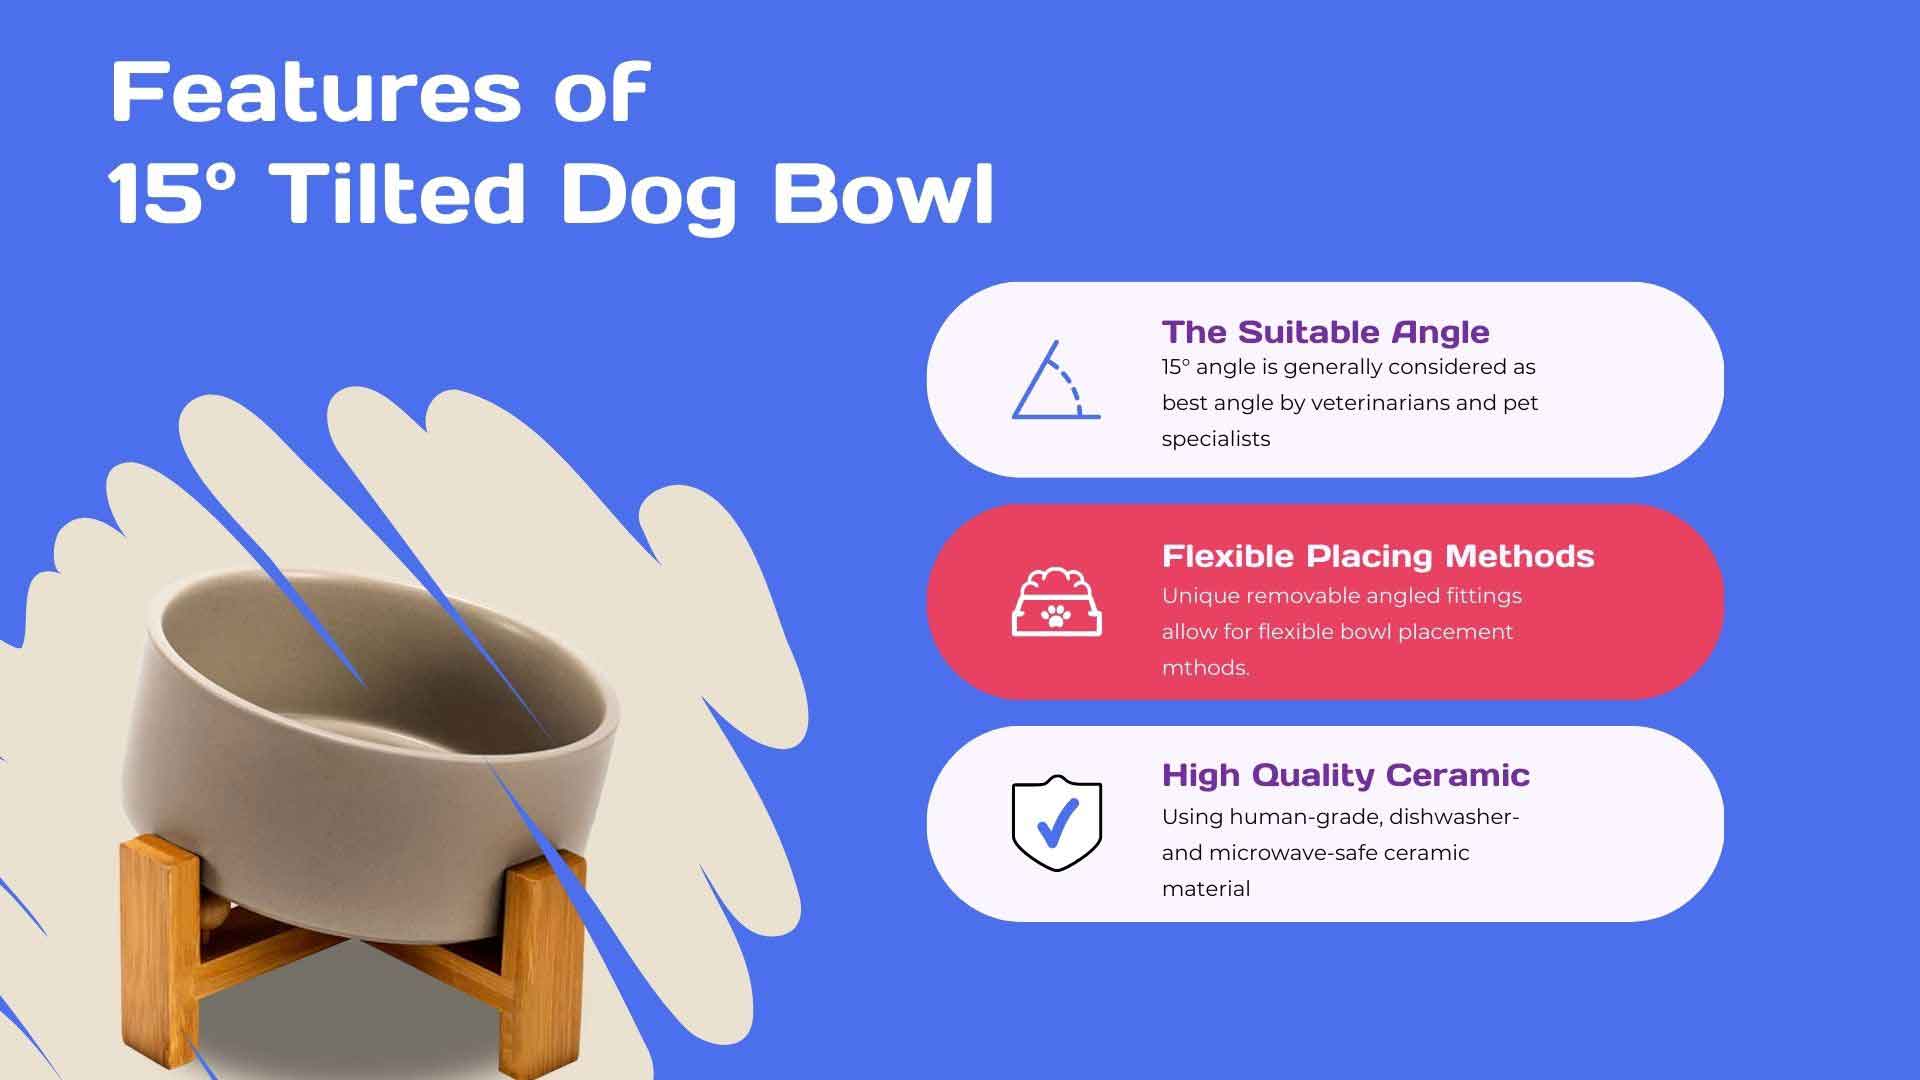 features of spunkyjunky 15° tilted dog bowl